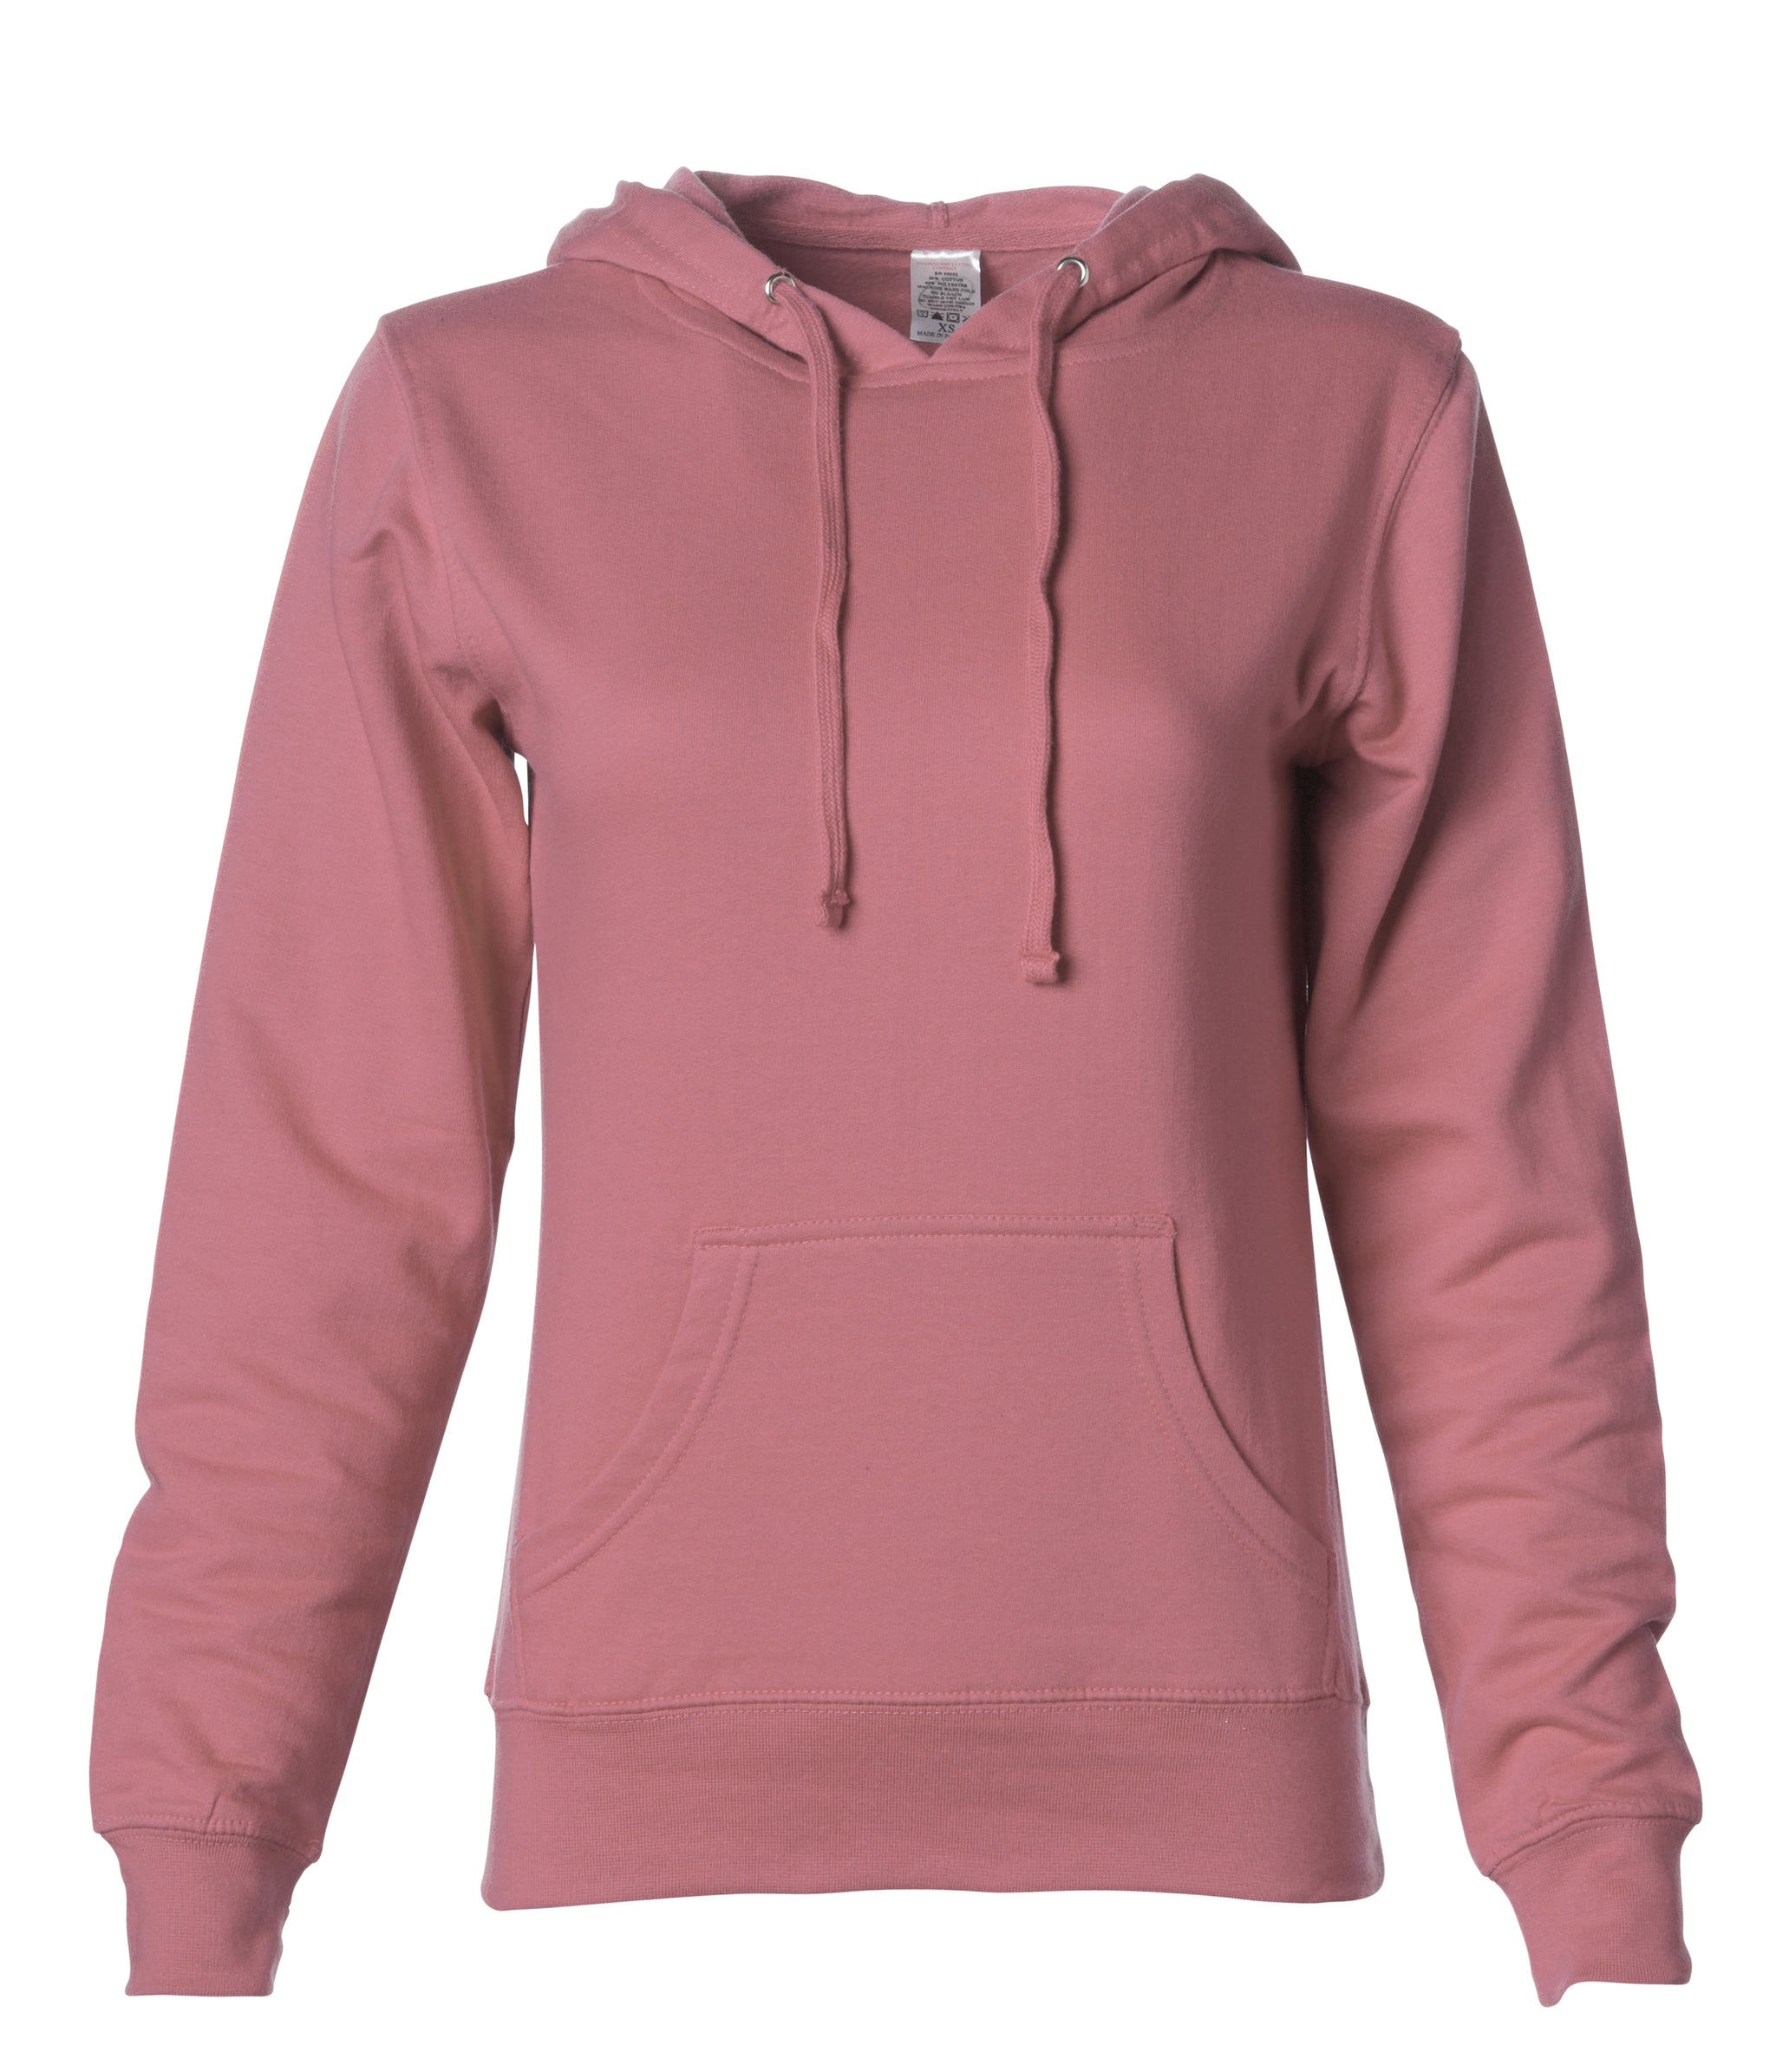 hooded tops for ladies